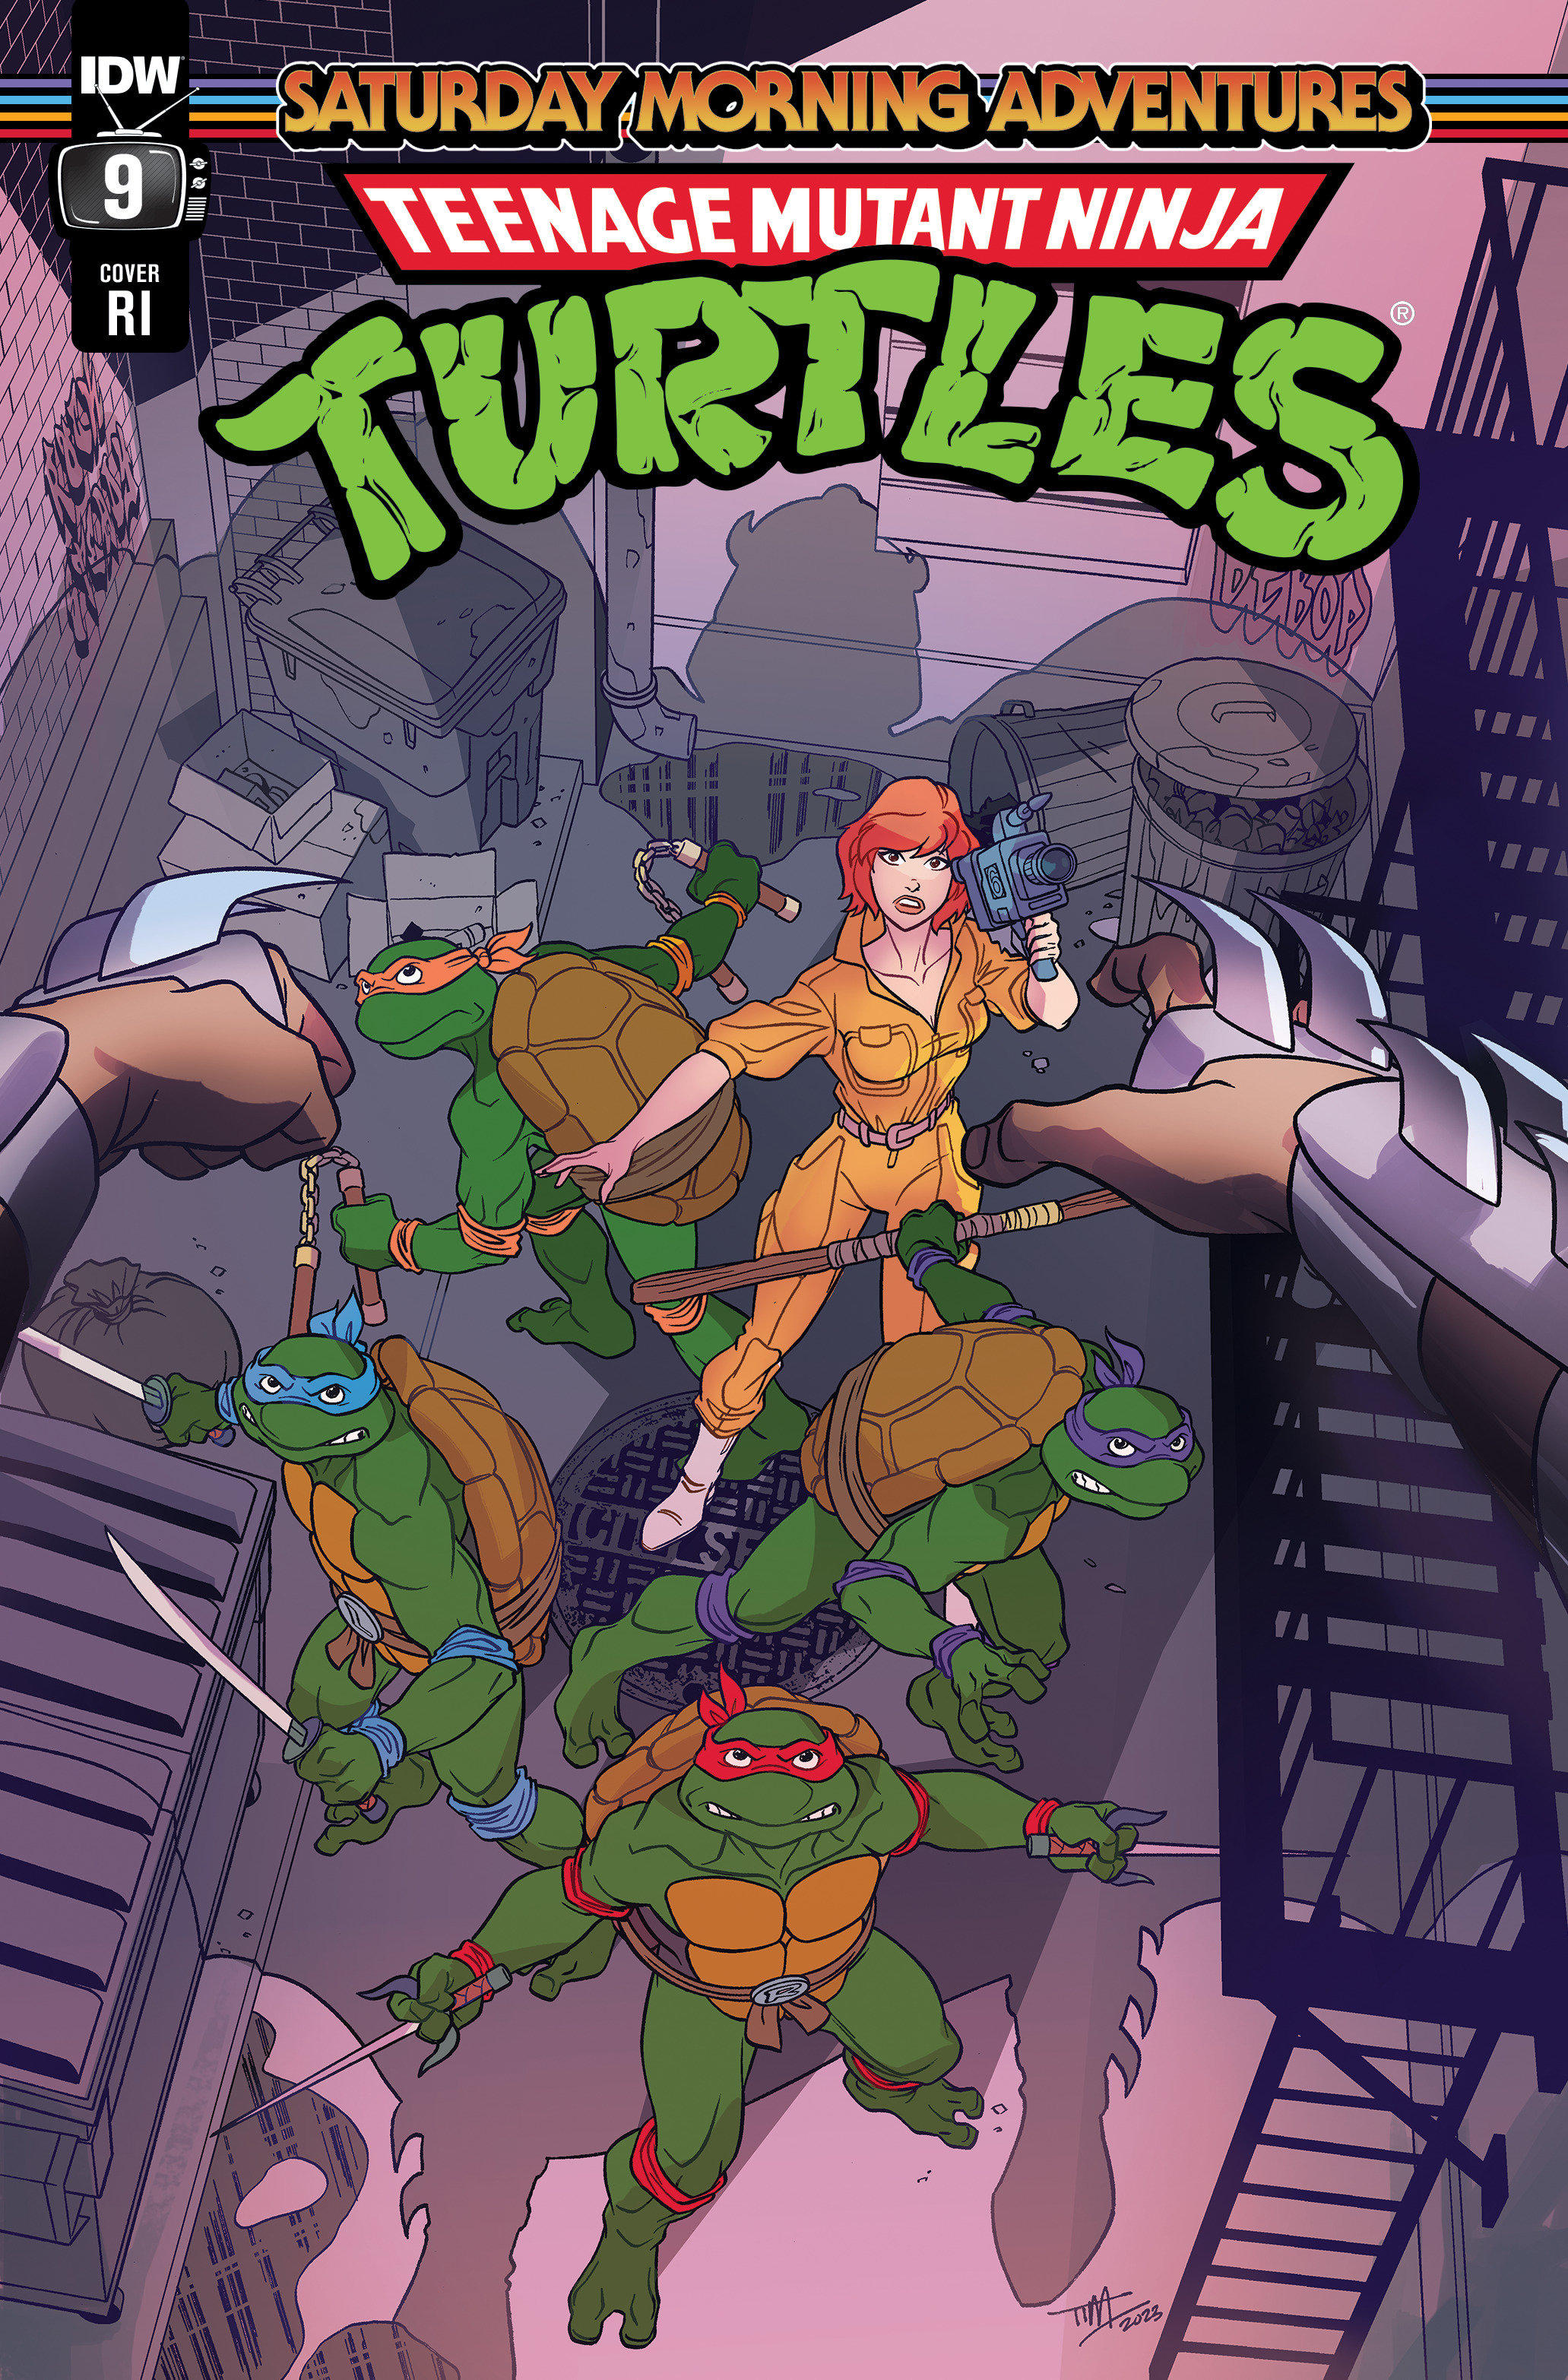 Teenage Mutant Ninja Turtles Saturday Morning Adventures Continued! #9 Cover Levins 1 for 10 Incentive